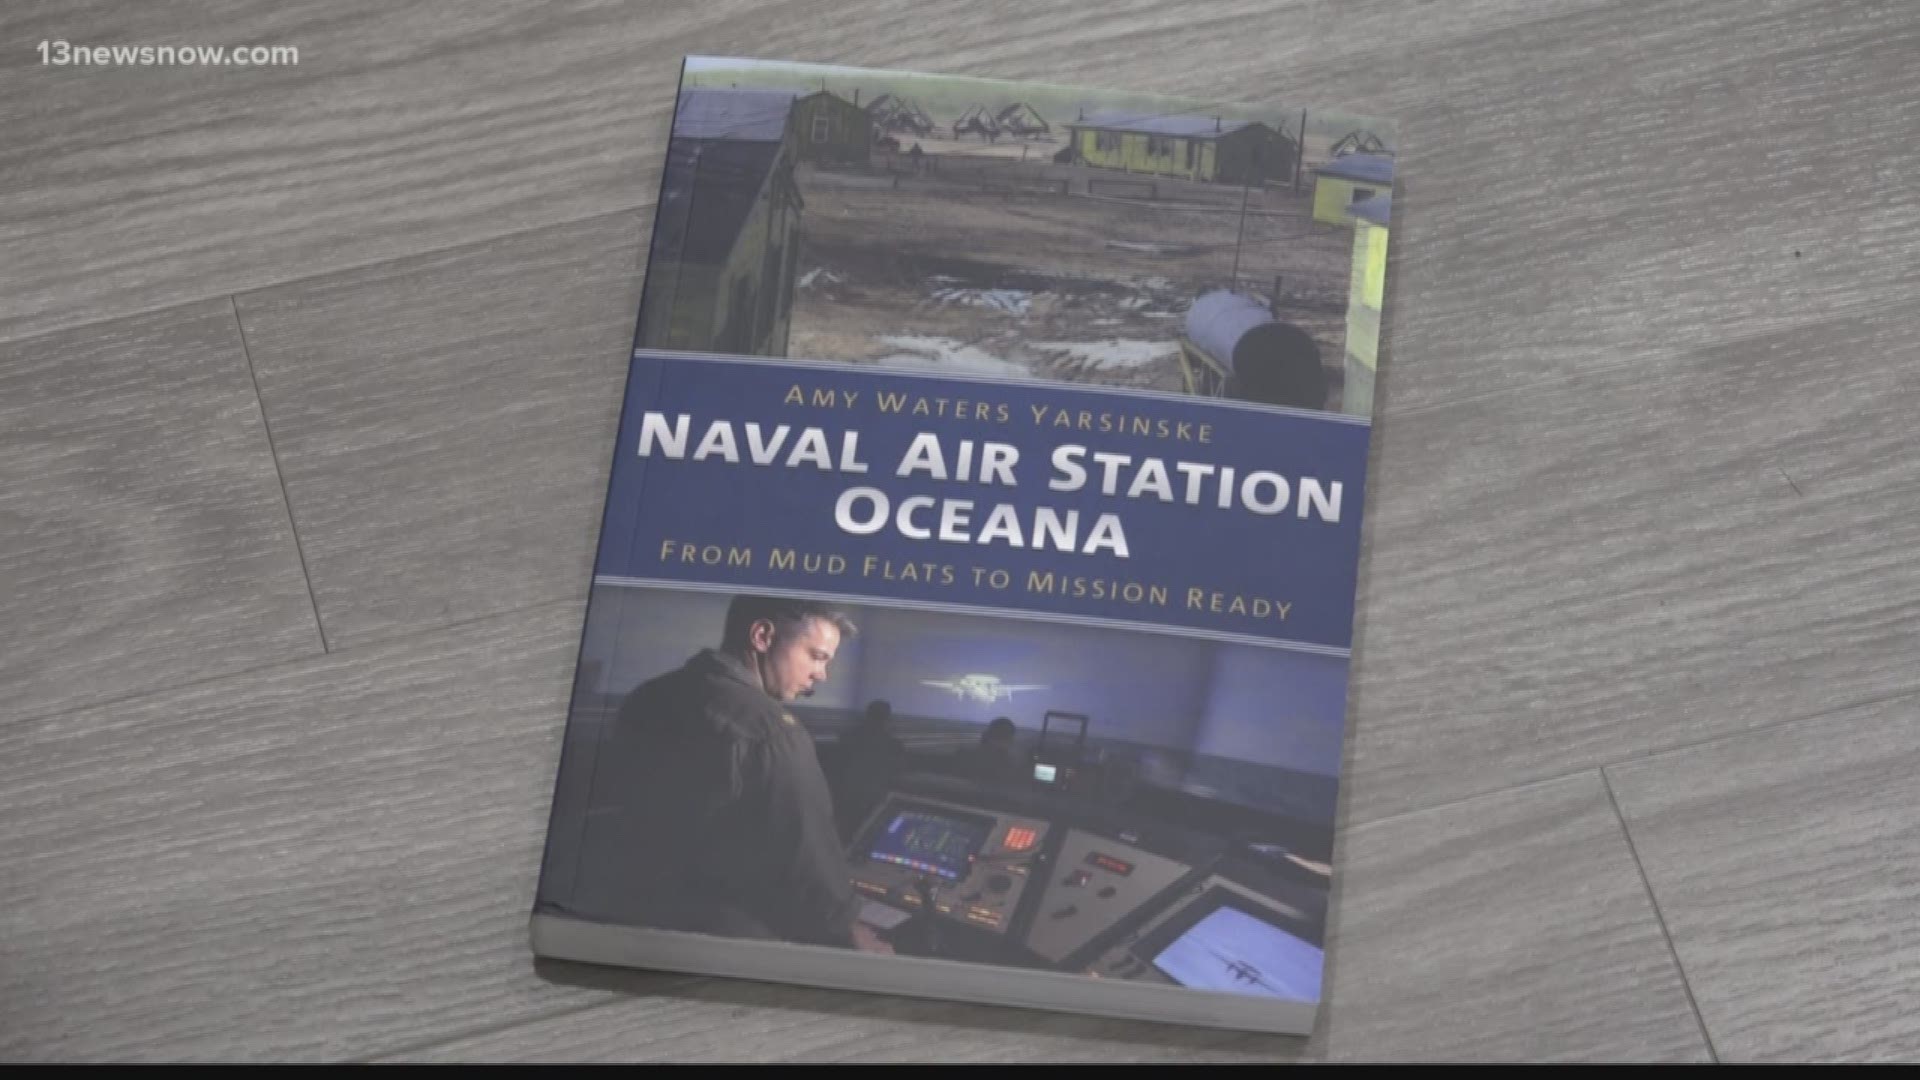 Amy Waters Yarsinske wrote a book about NAS Oceana.